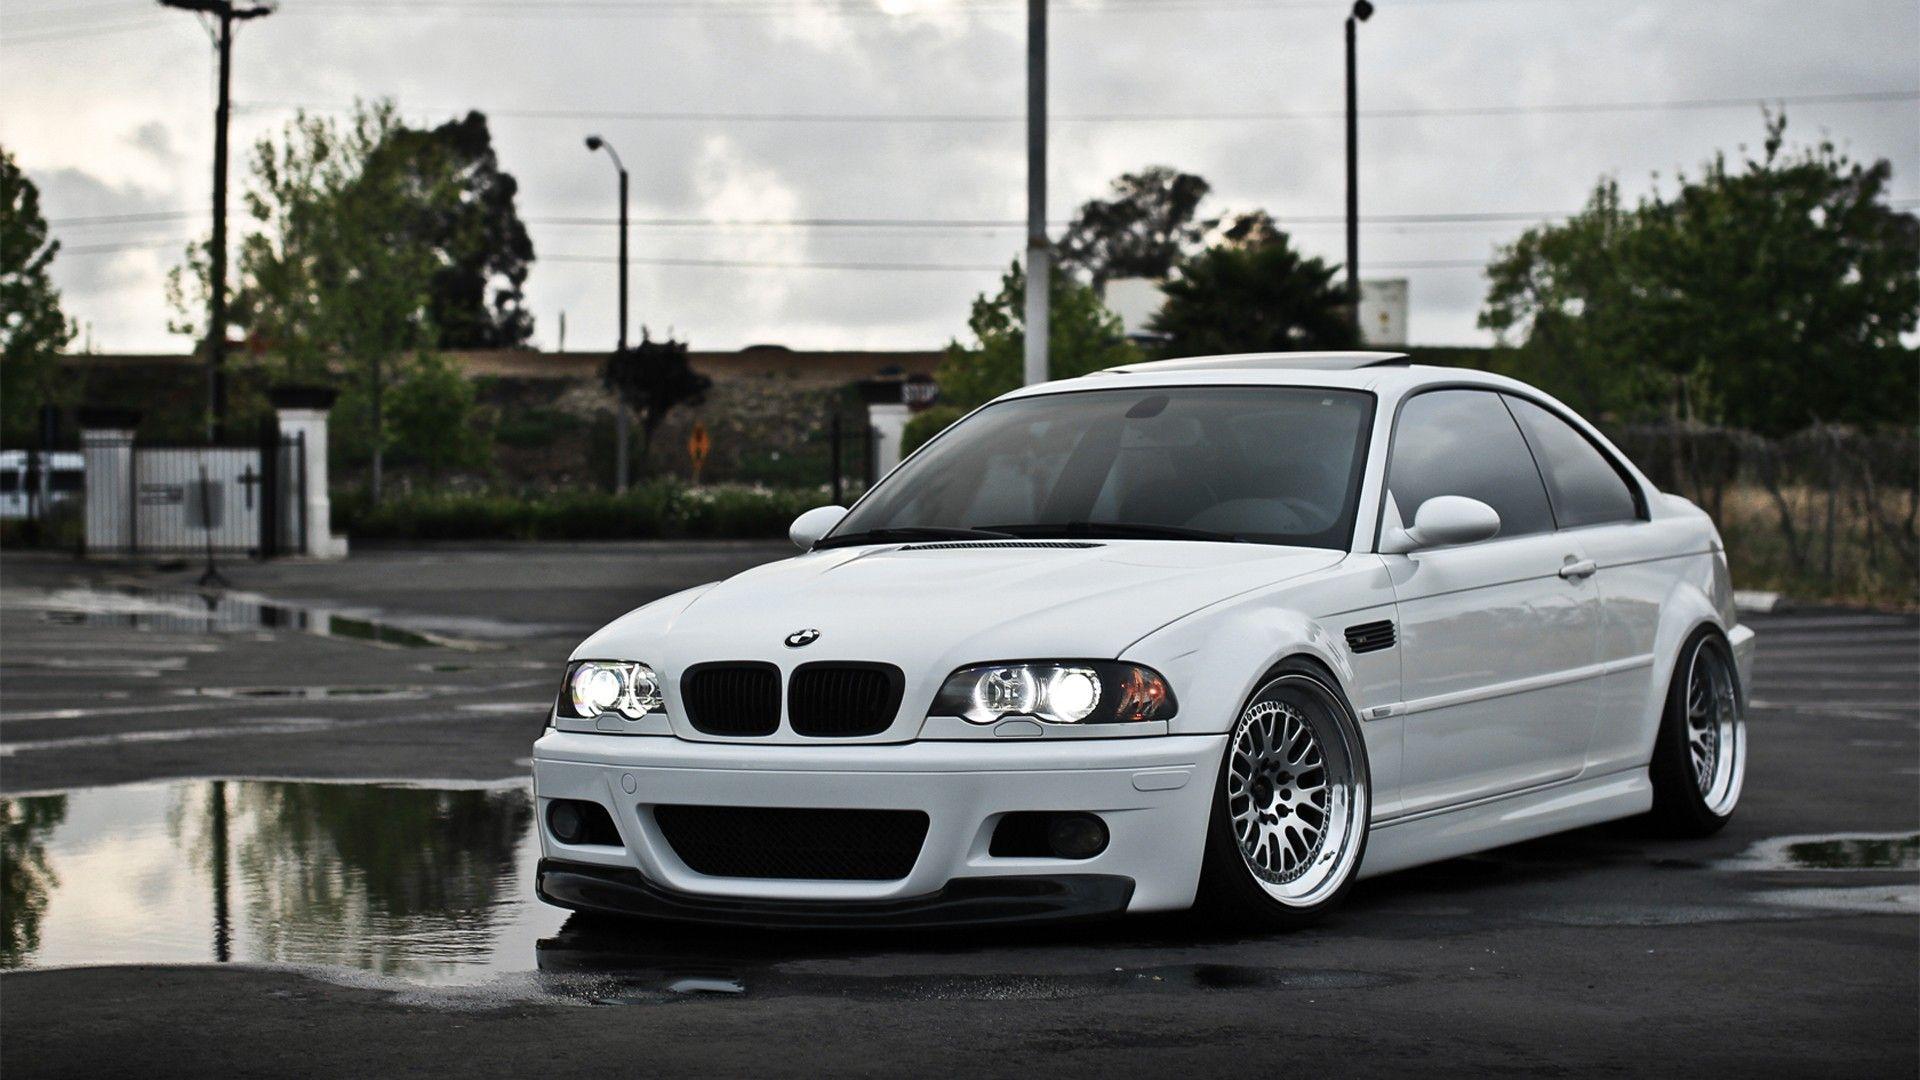 Pix For > Bmw E46 M3 Wallpapers